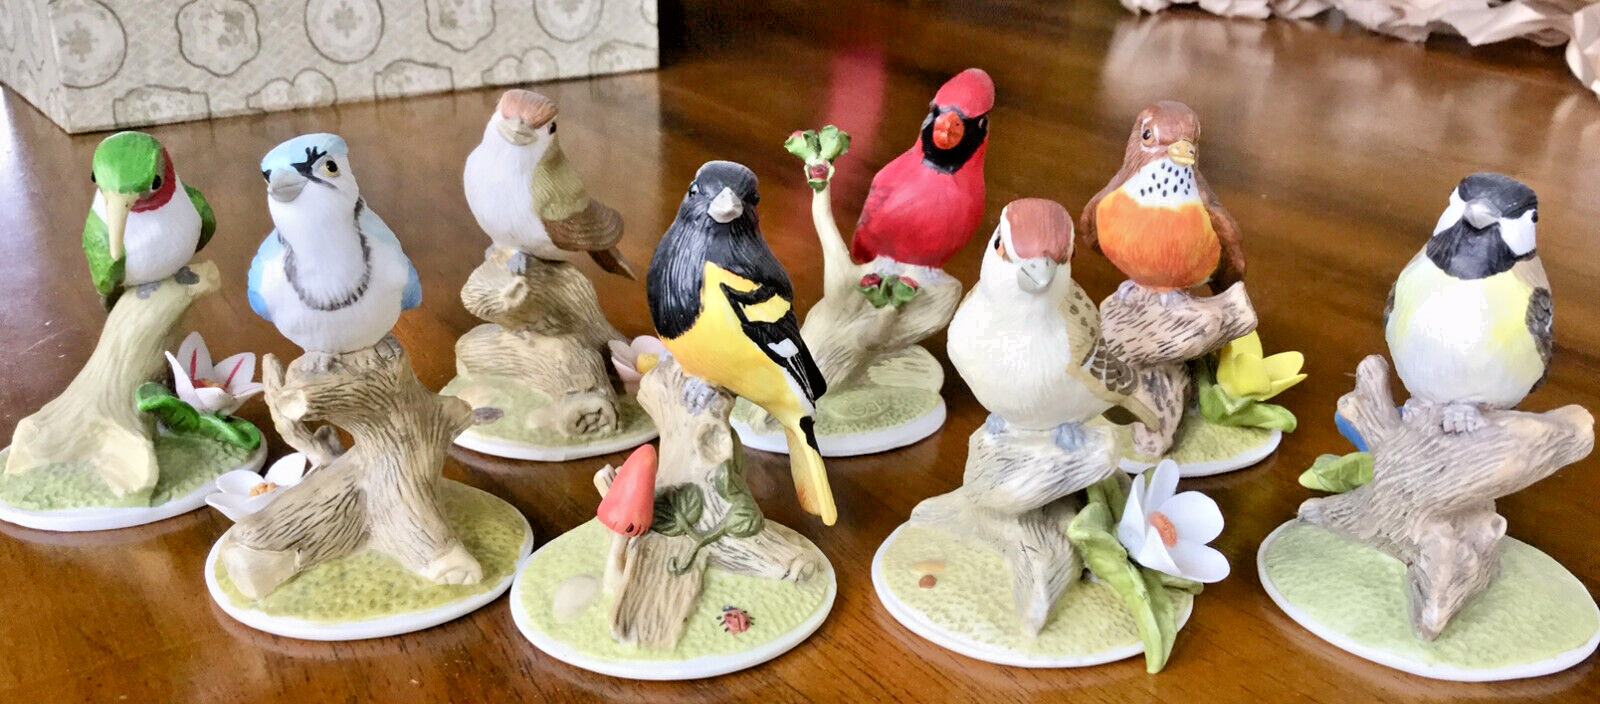 On Nature’s Wing Munro Collectibles Fine Porcelain Hand-painted Bird Figurines